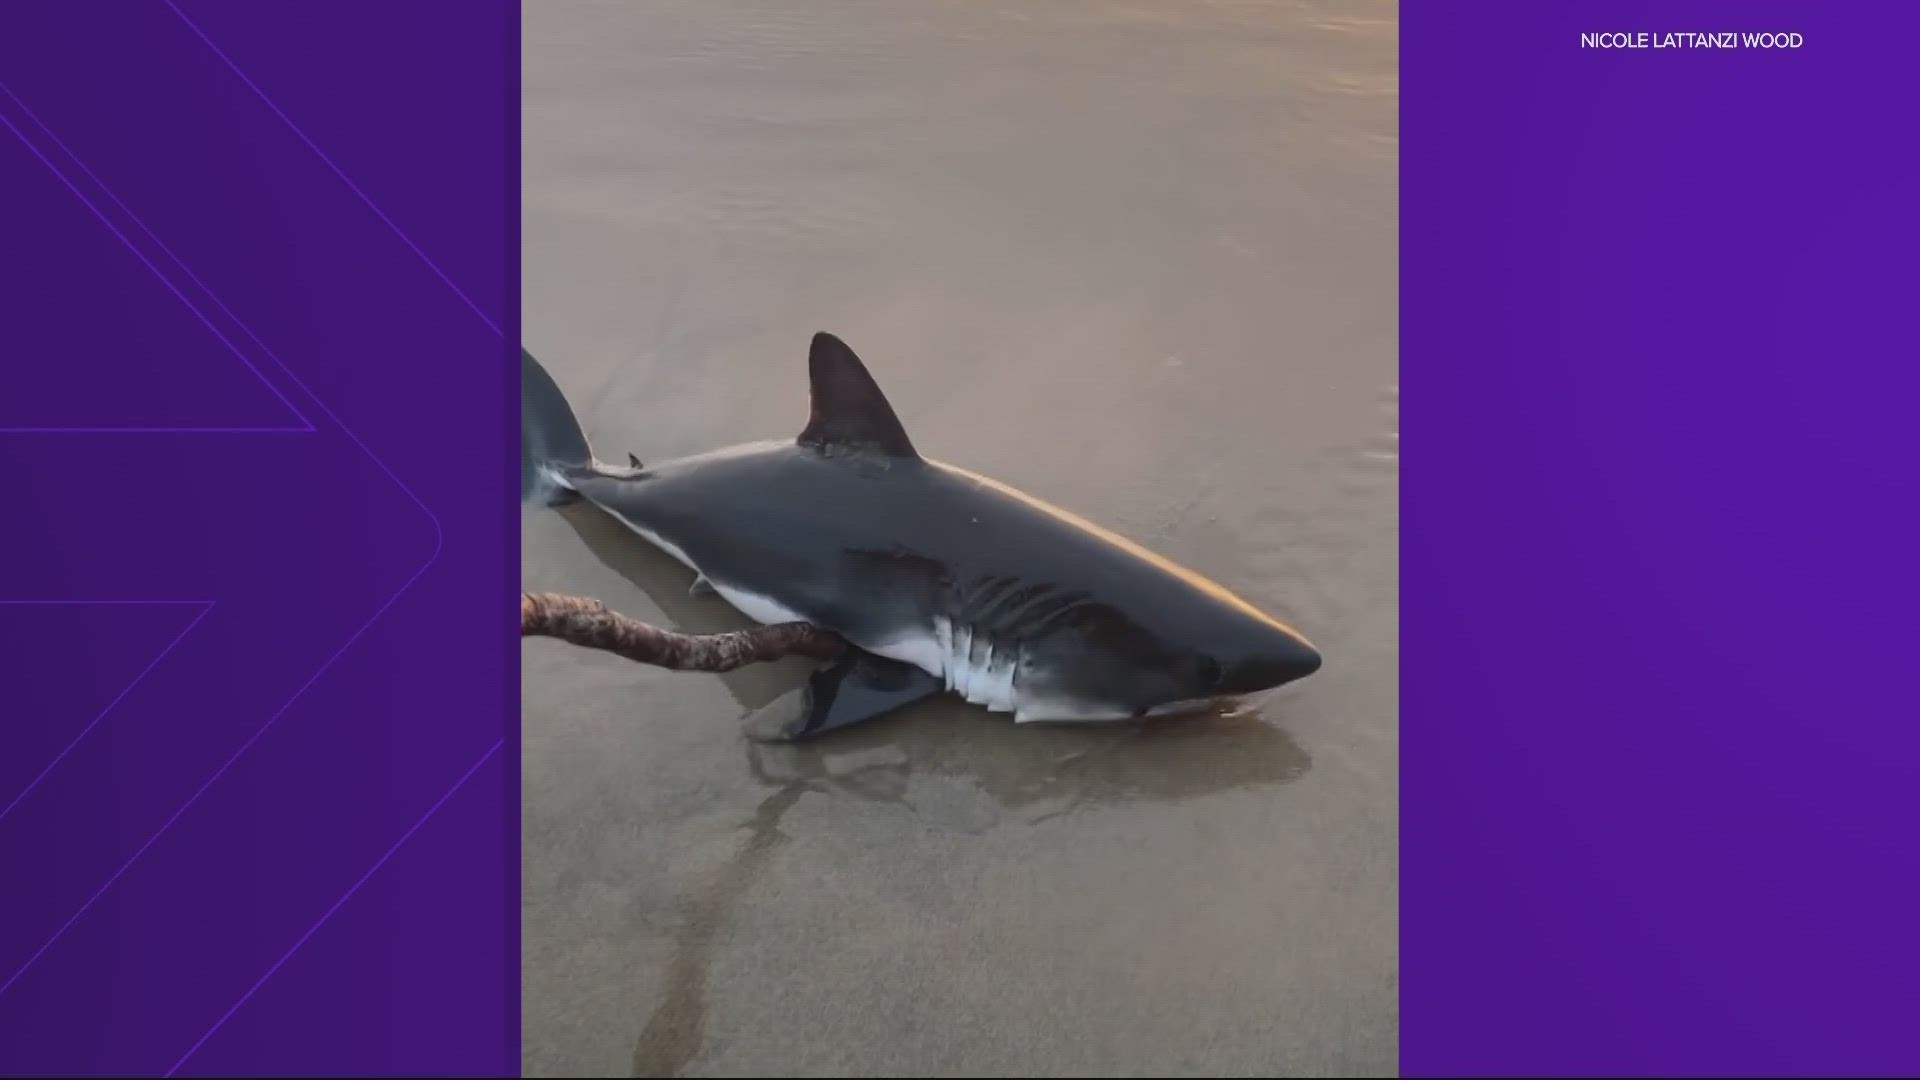 It happened at Rockaway Beach earlier this week. A couple spotted the shark and rolled it back into the water. They believed it was a salmon shark.